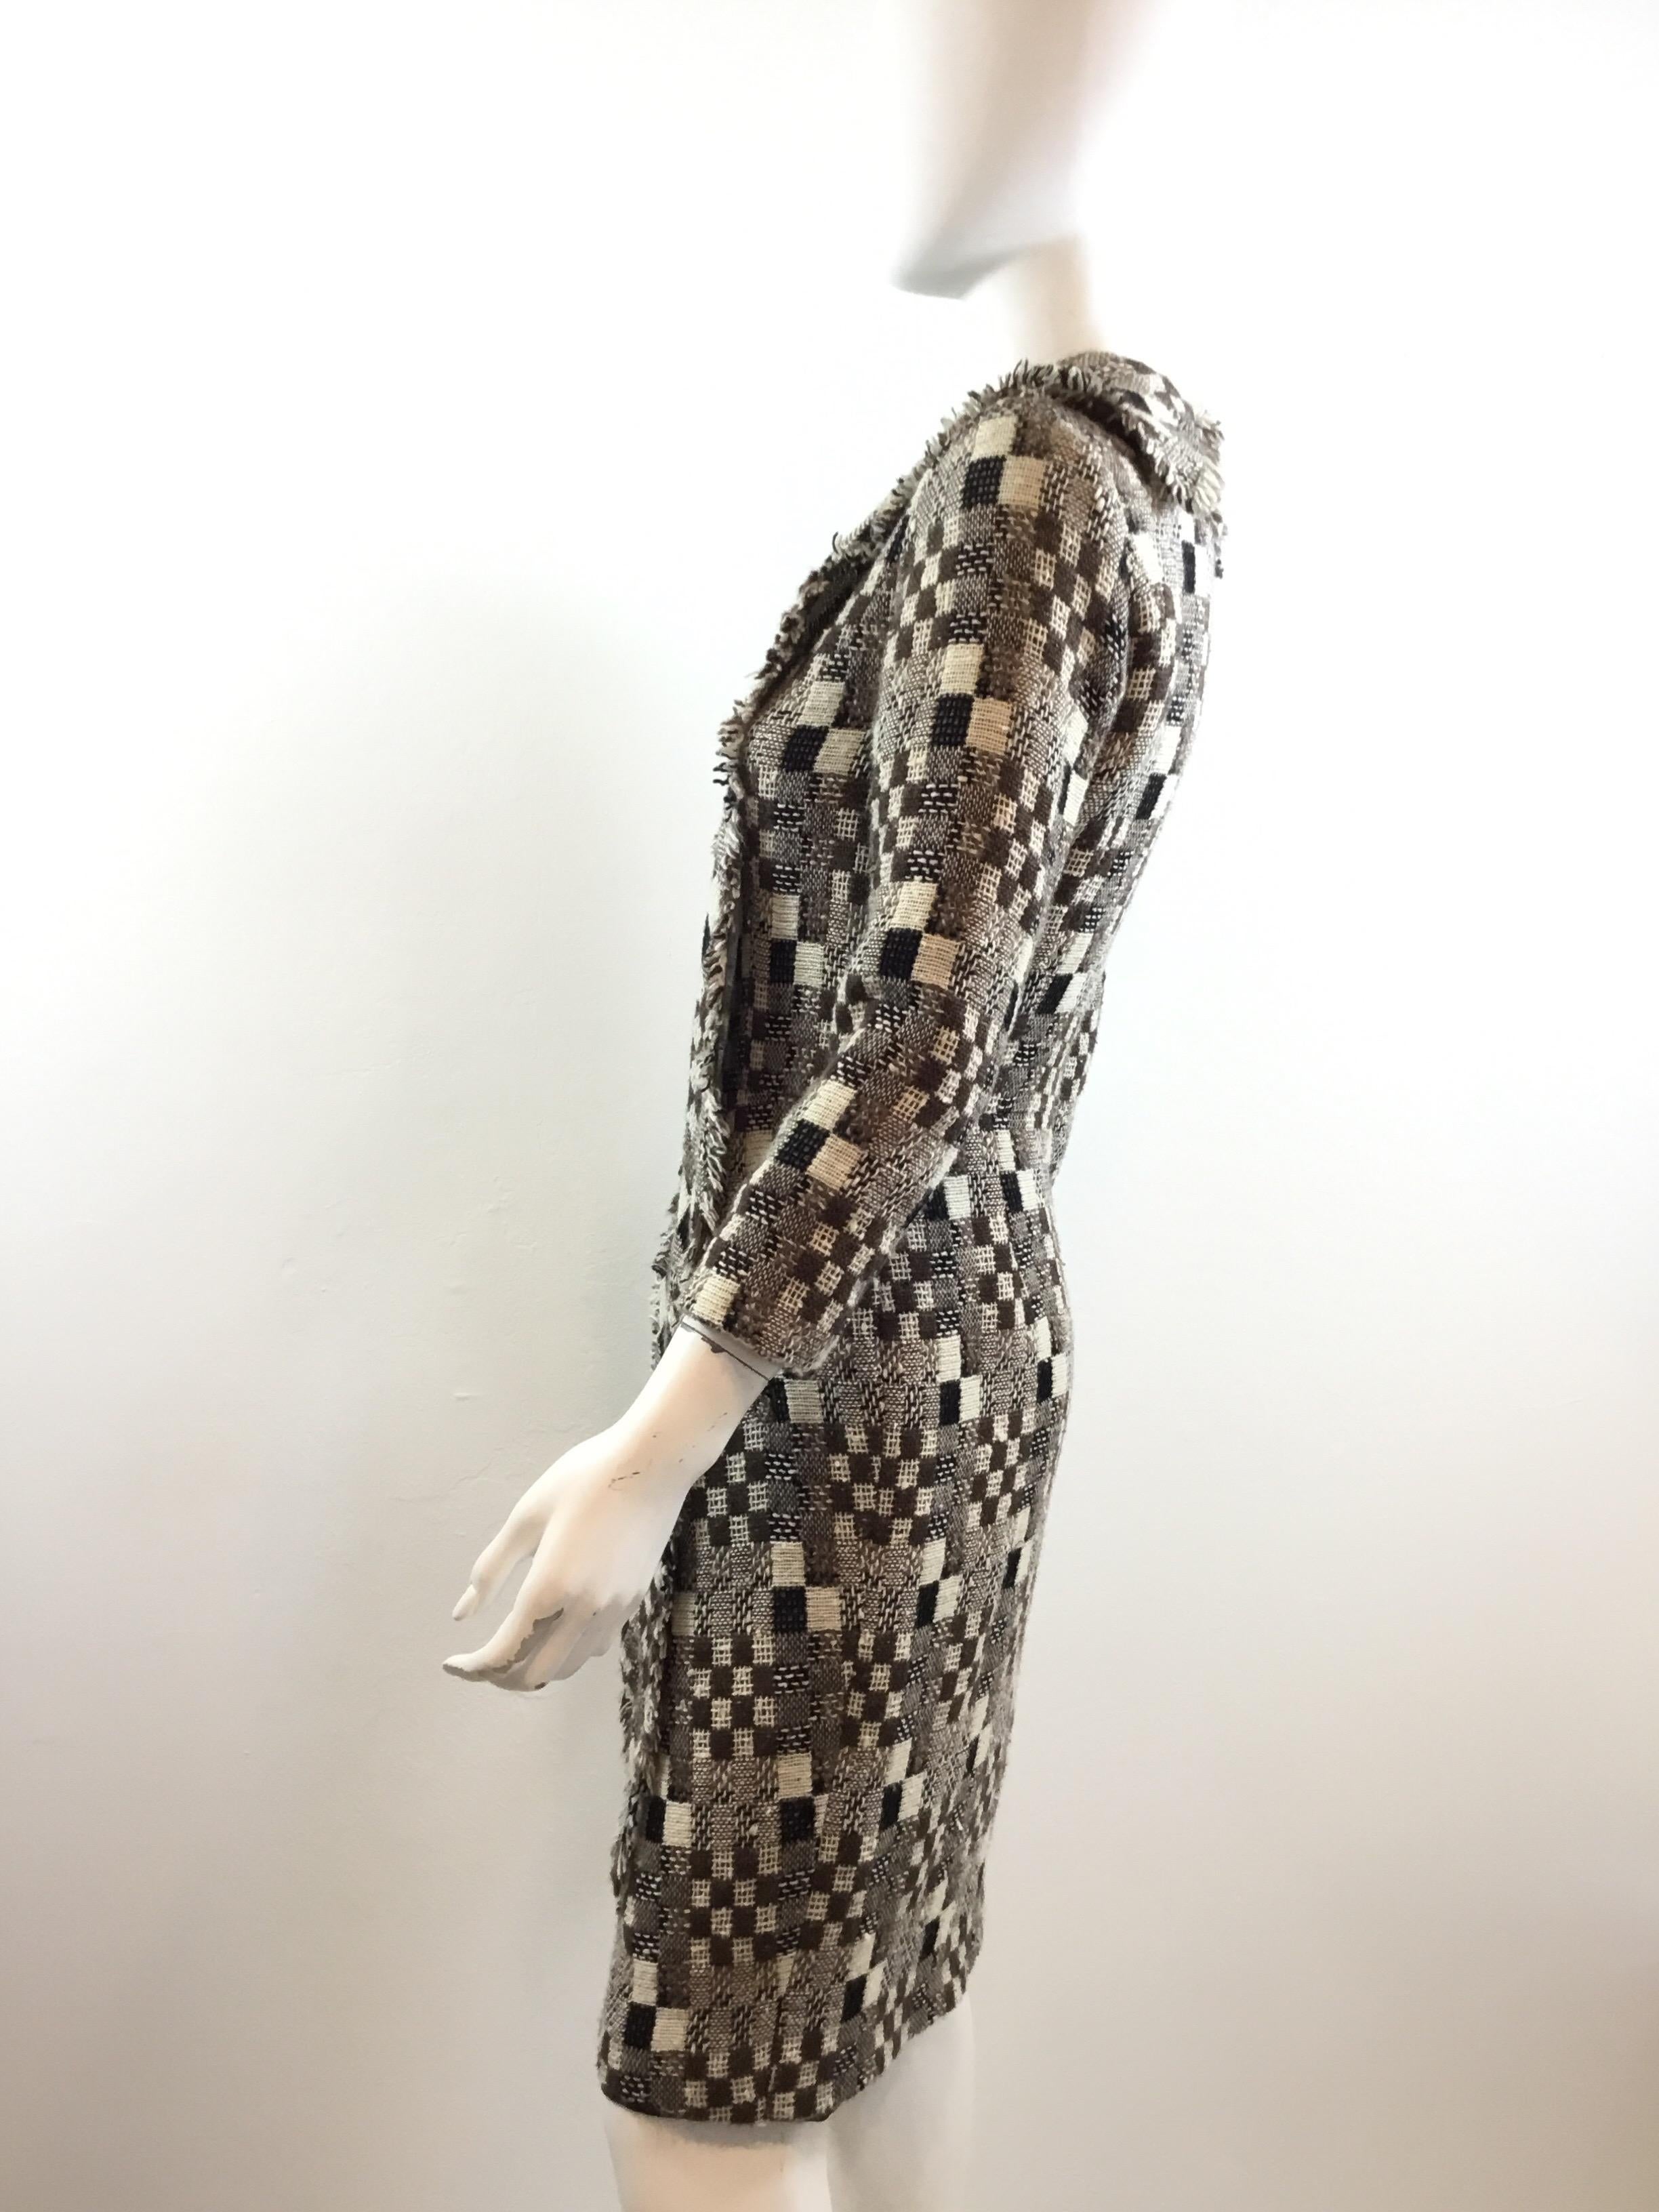 Oscar de la Renta knitted dress featured in a various thin of beige and brown colors throughout with an attached scarf at the neck. Dress has two pockets that have been uncut. Back zipper fastening and a full lining. Dress is a size 6, made in